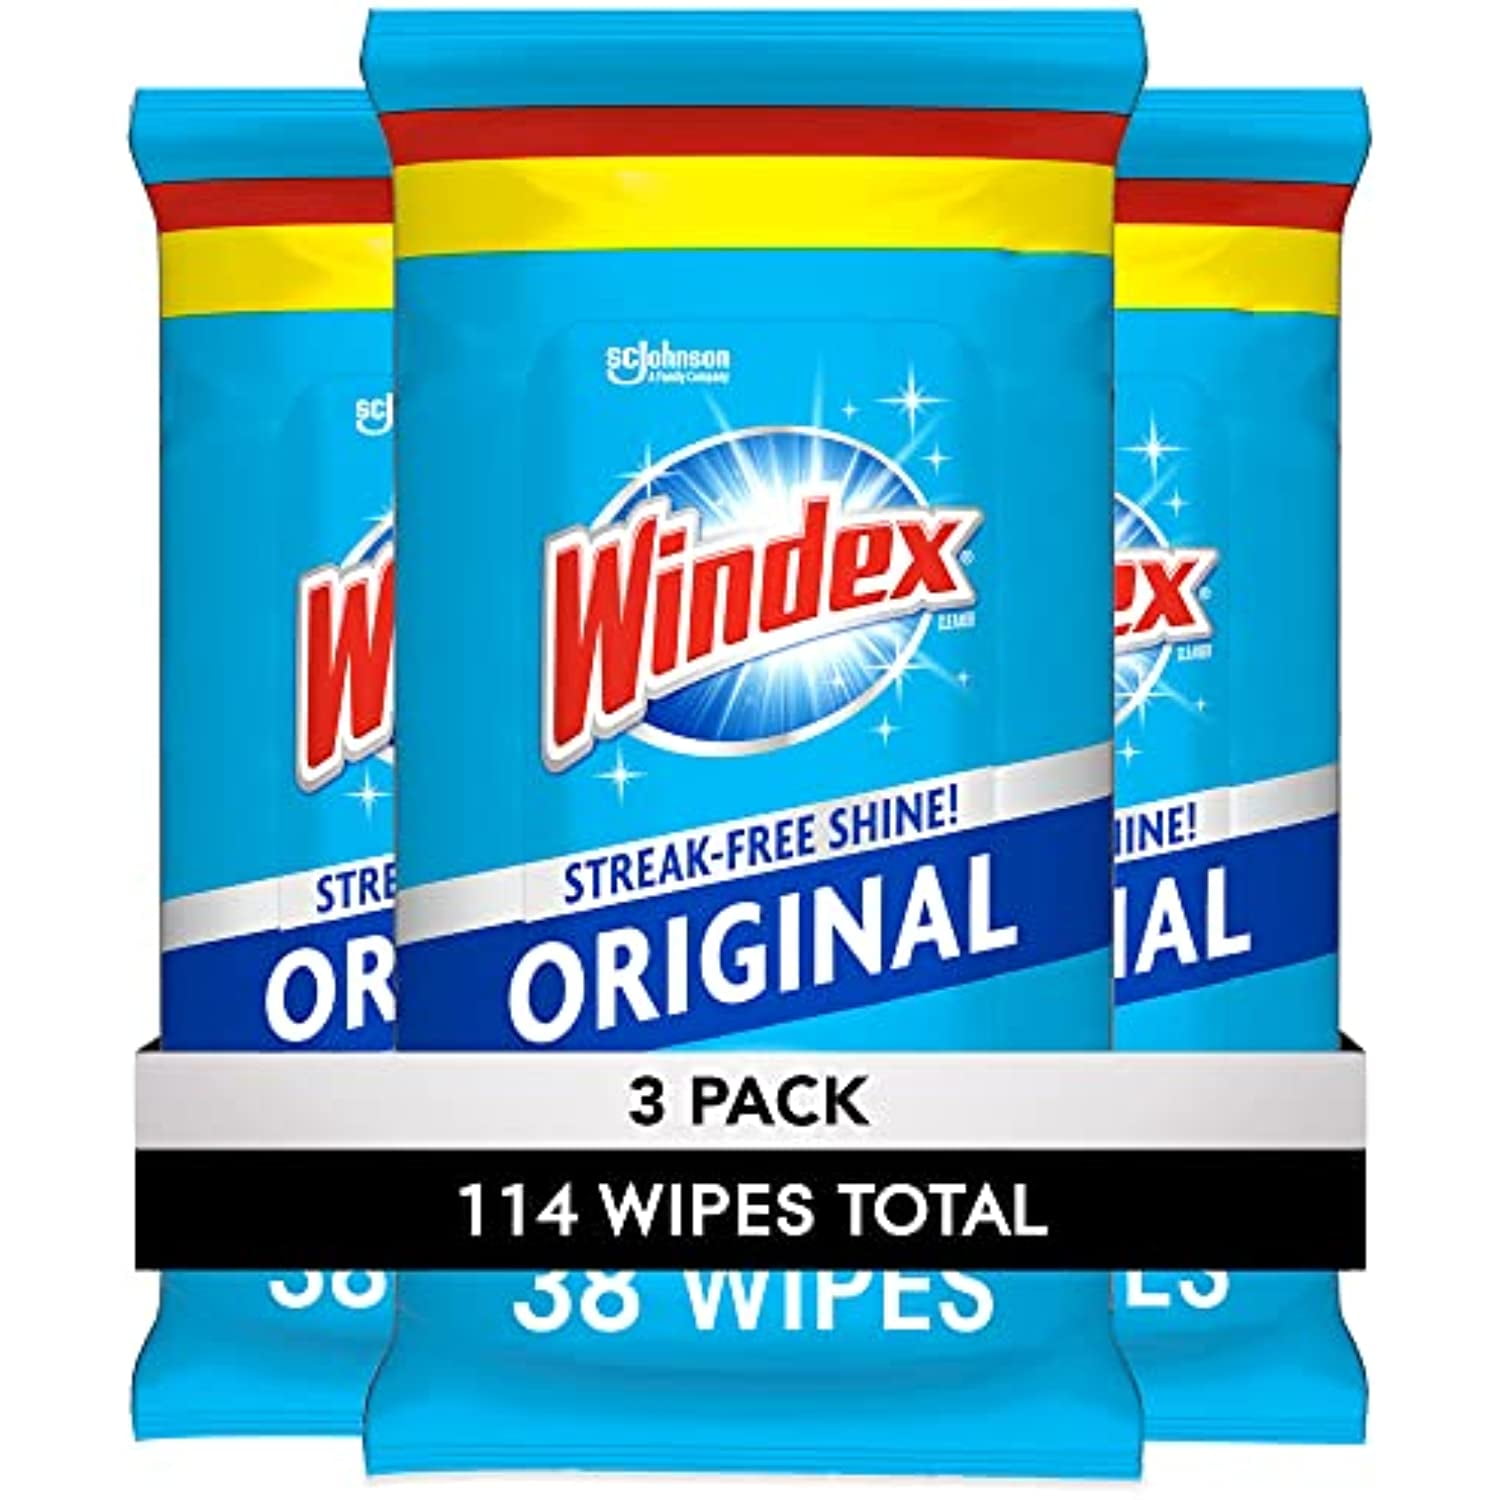  Windex Electronics 'Wipe and Go' Wipes, 4CT (Pack of 3) :  Health & Household